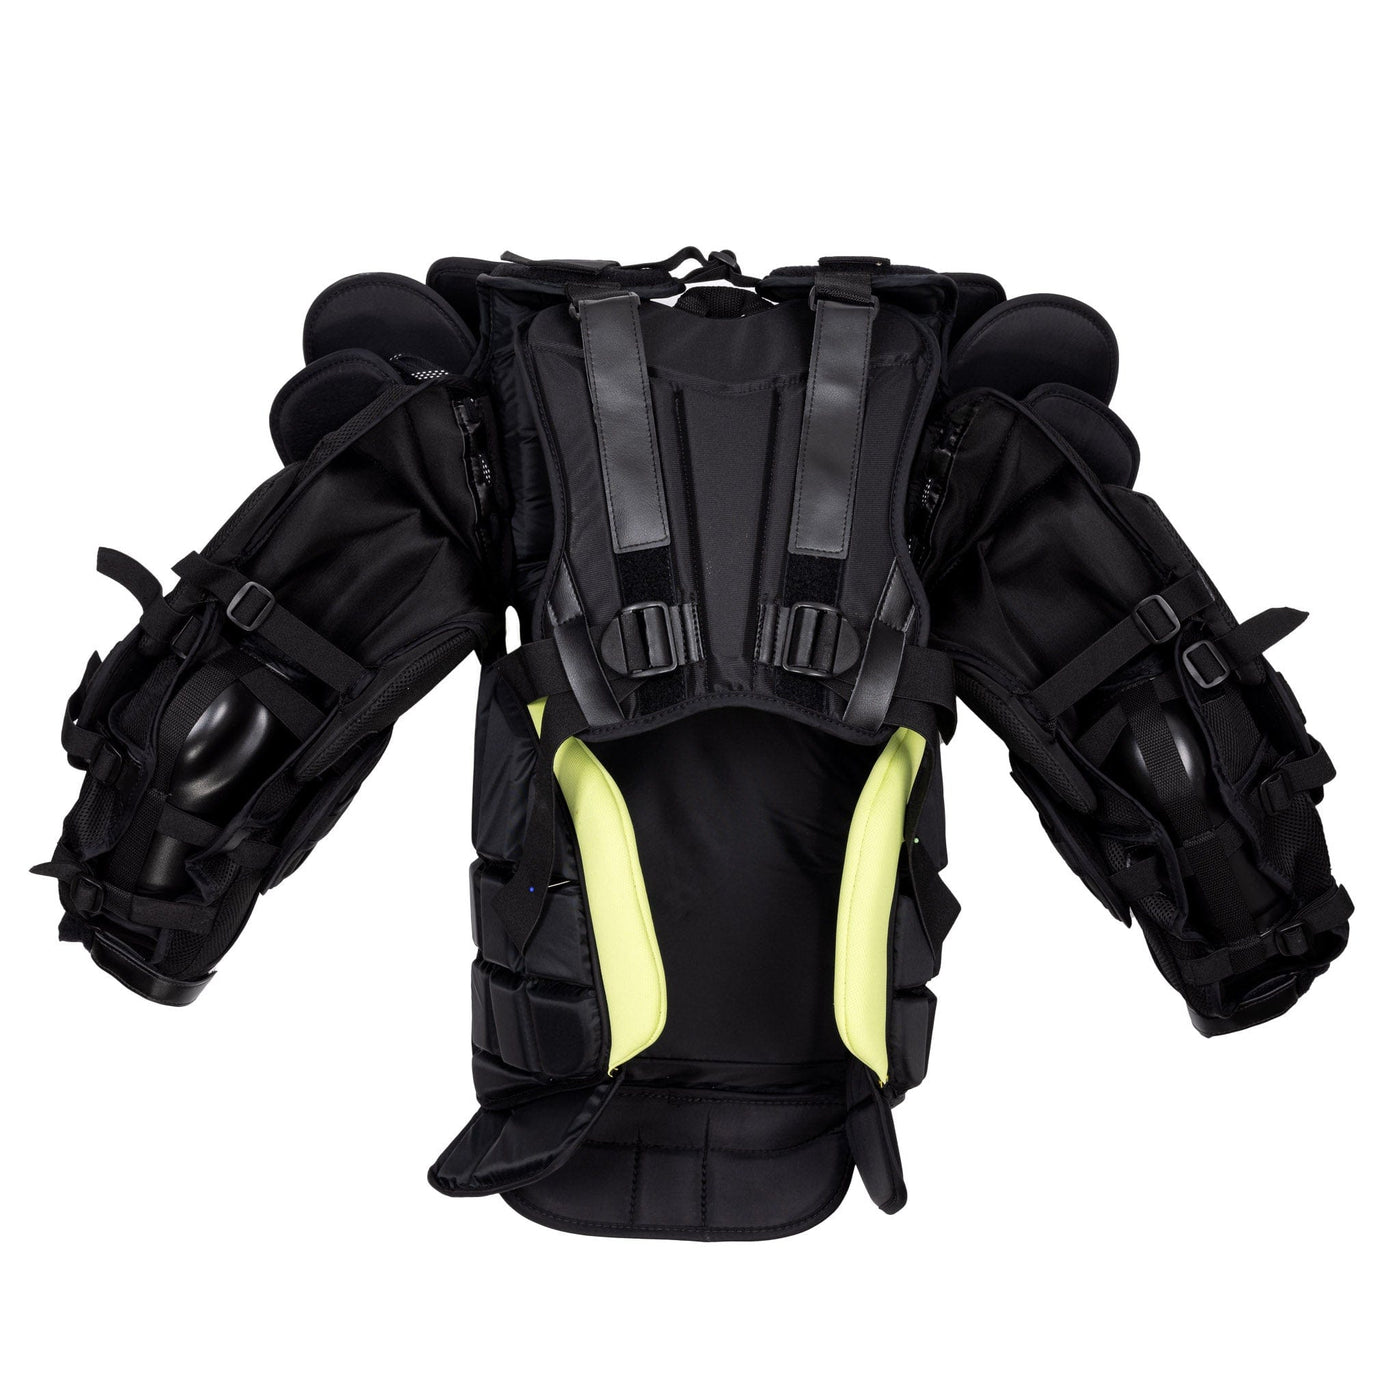 Warrior Ritual X4 E+ Senior Chest & Arm Protector - The Hockey Shop Source For Sports